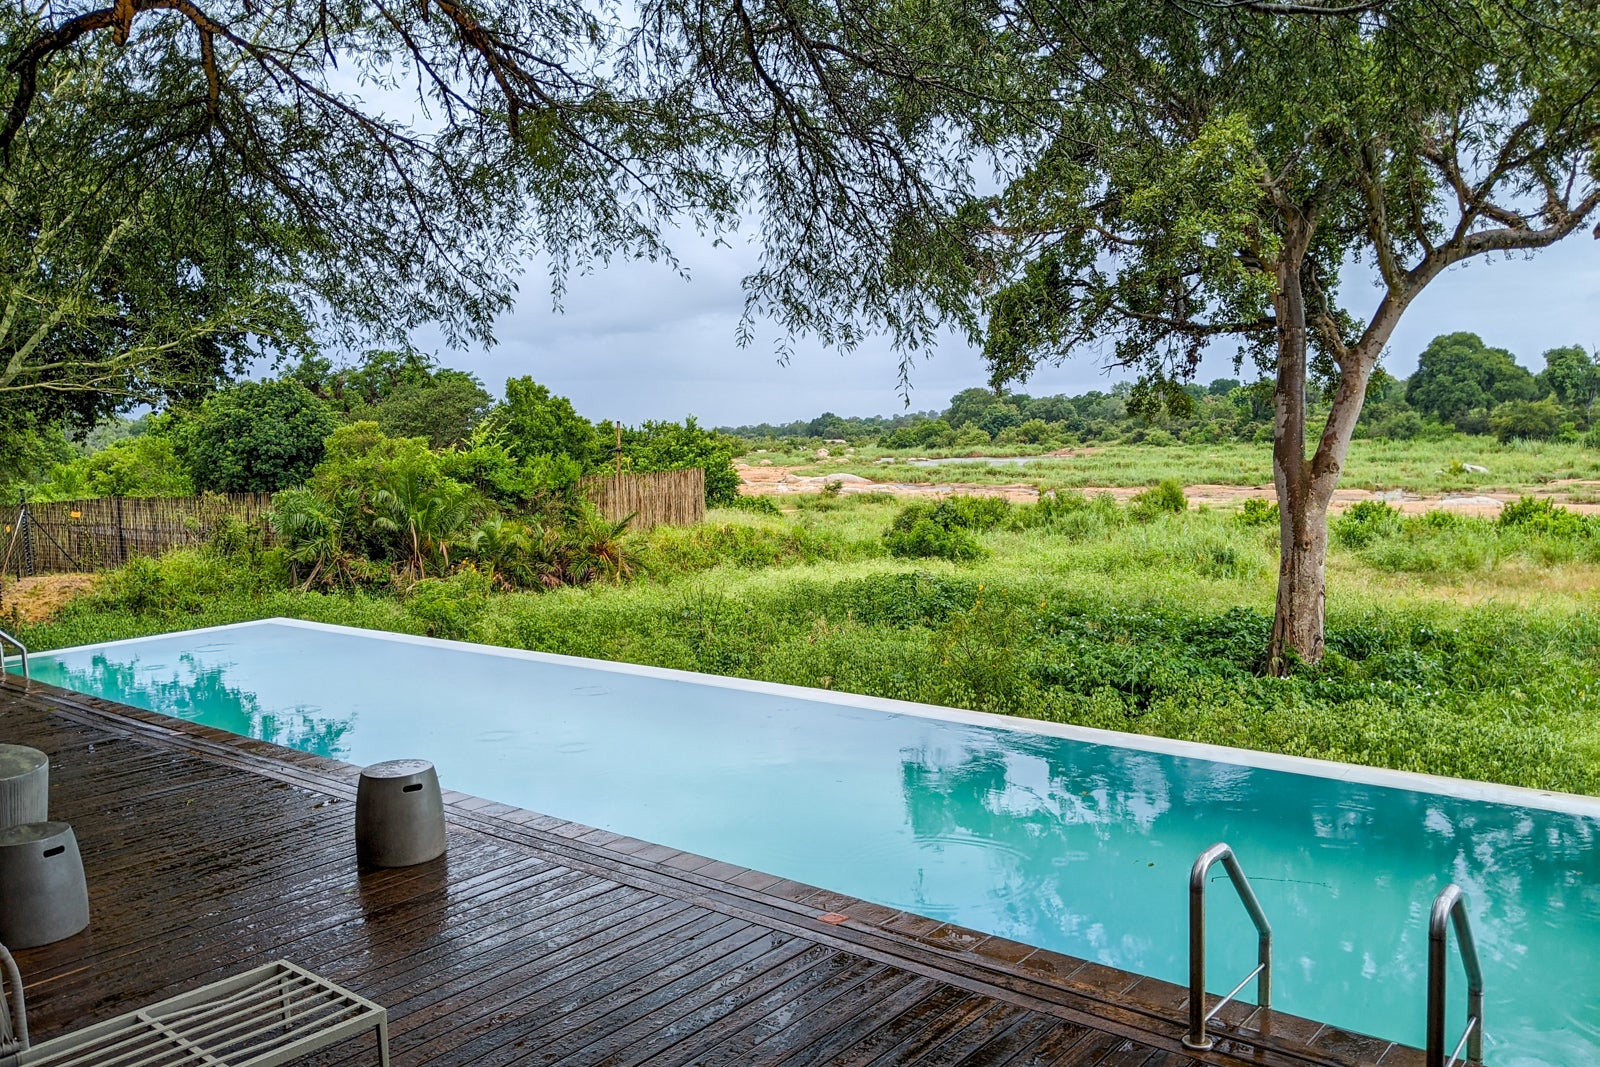 Why Marriott’s Protea Hotel Kruger Gate is perfect for an independent South African safari